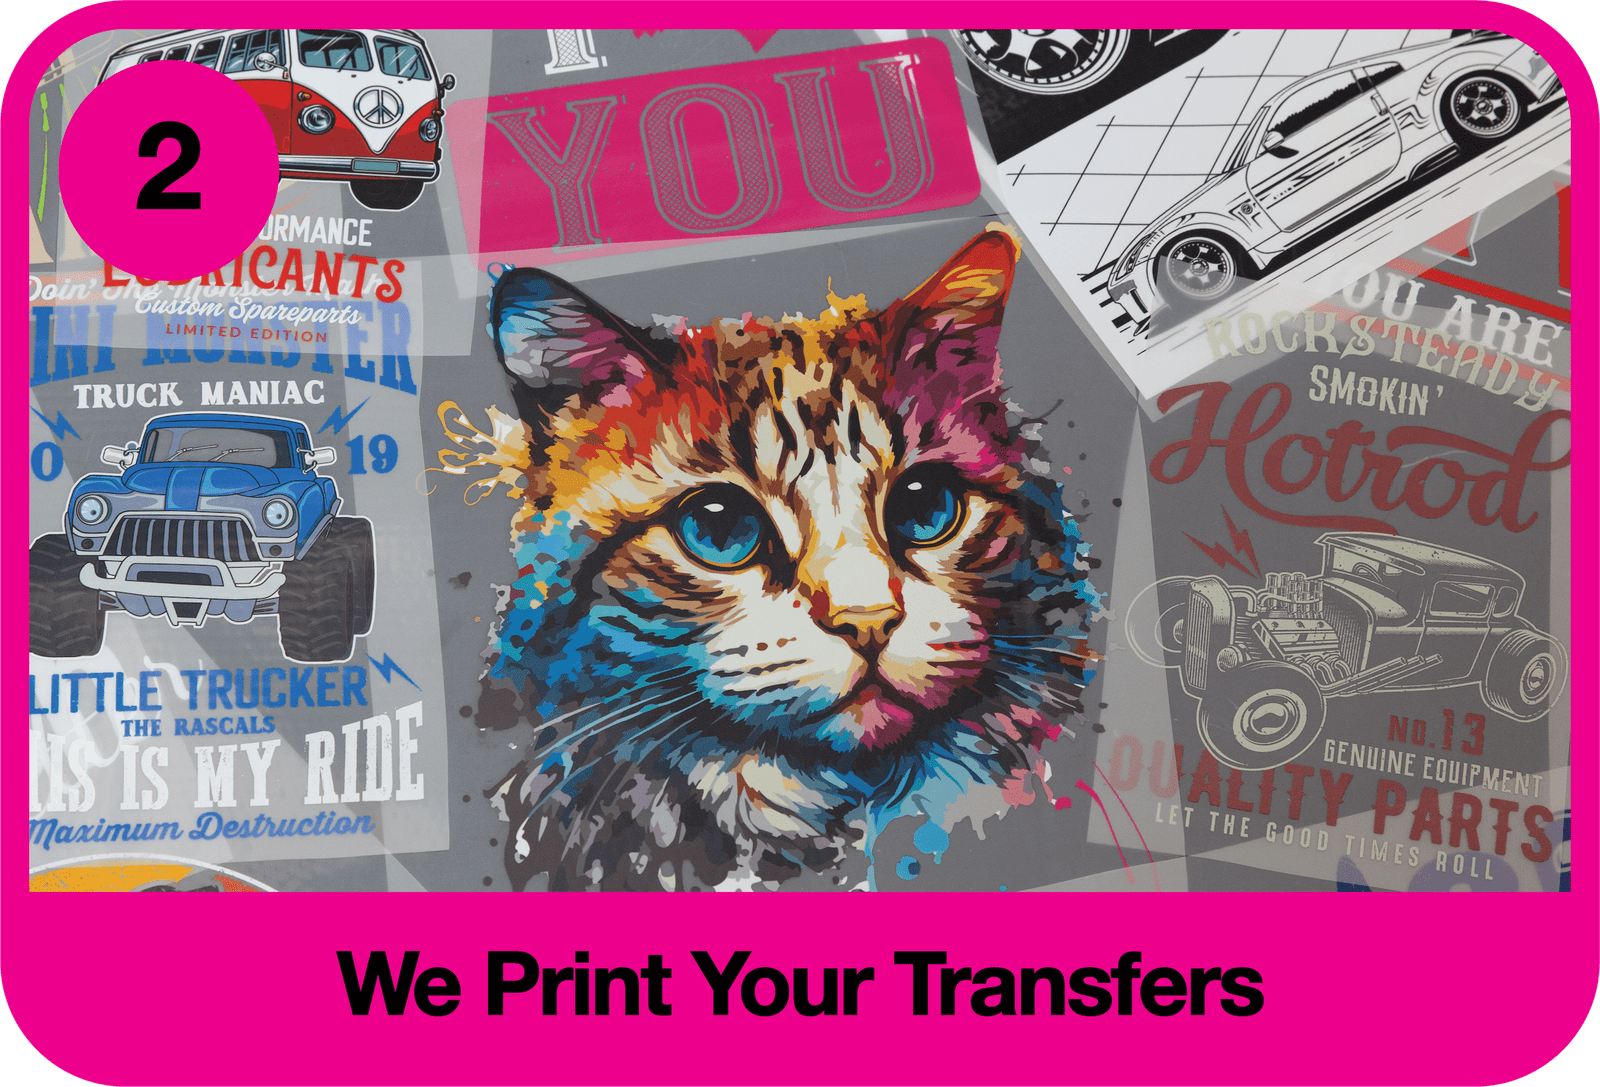 We Print Your Transfers